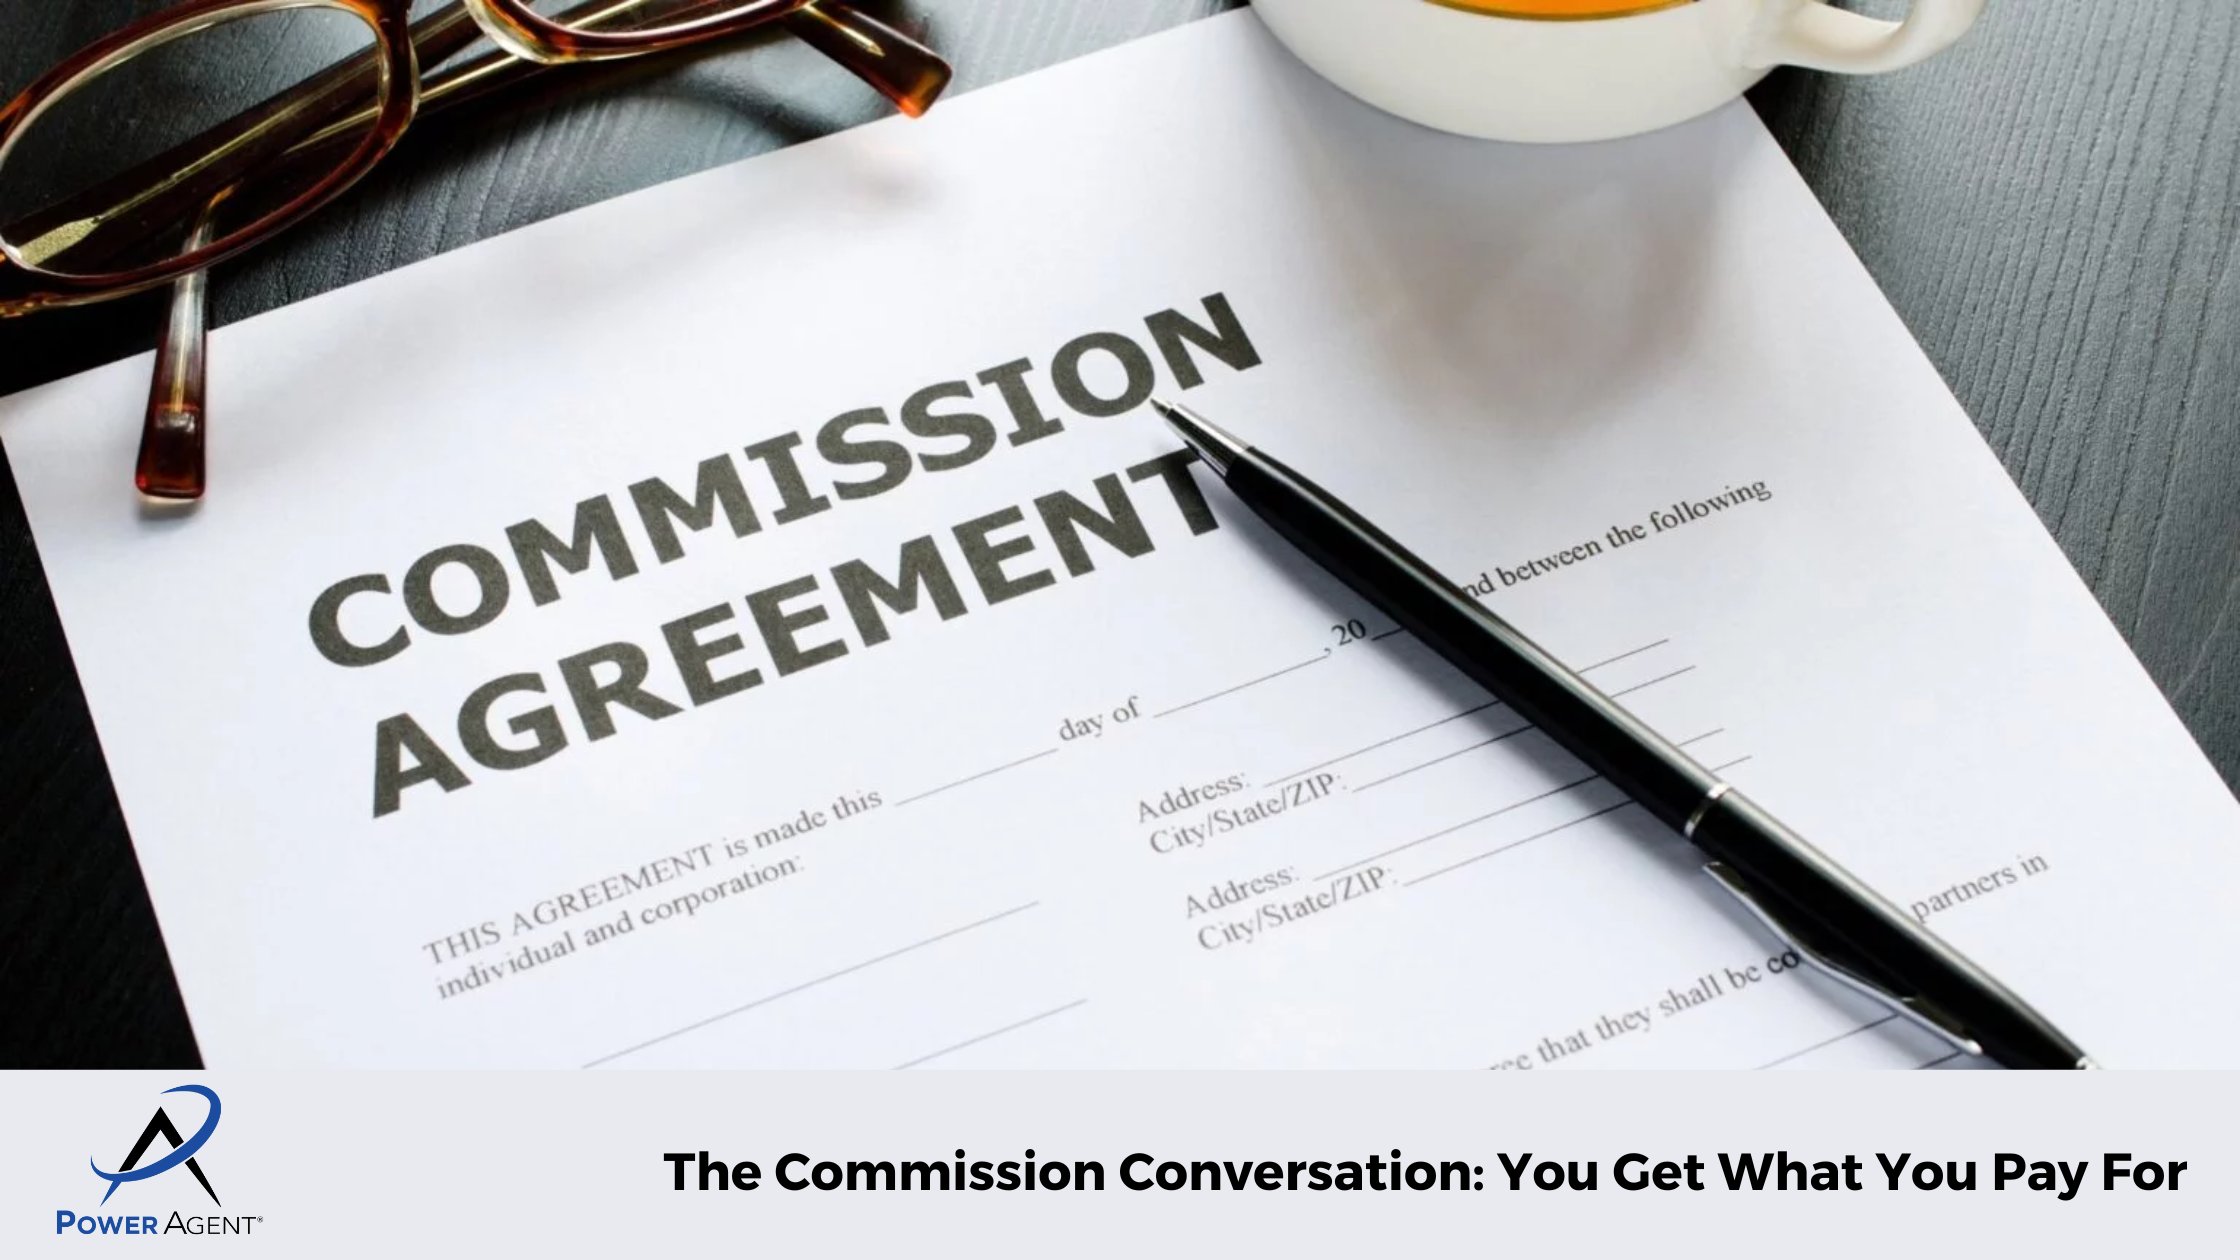 The Commission Conversation: You Get What You Pay For